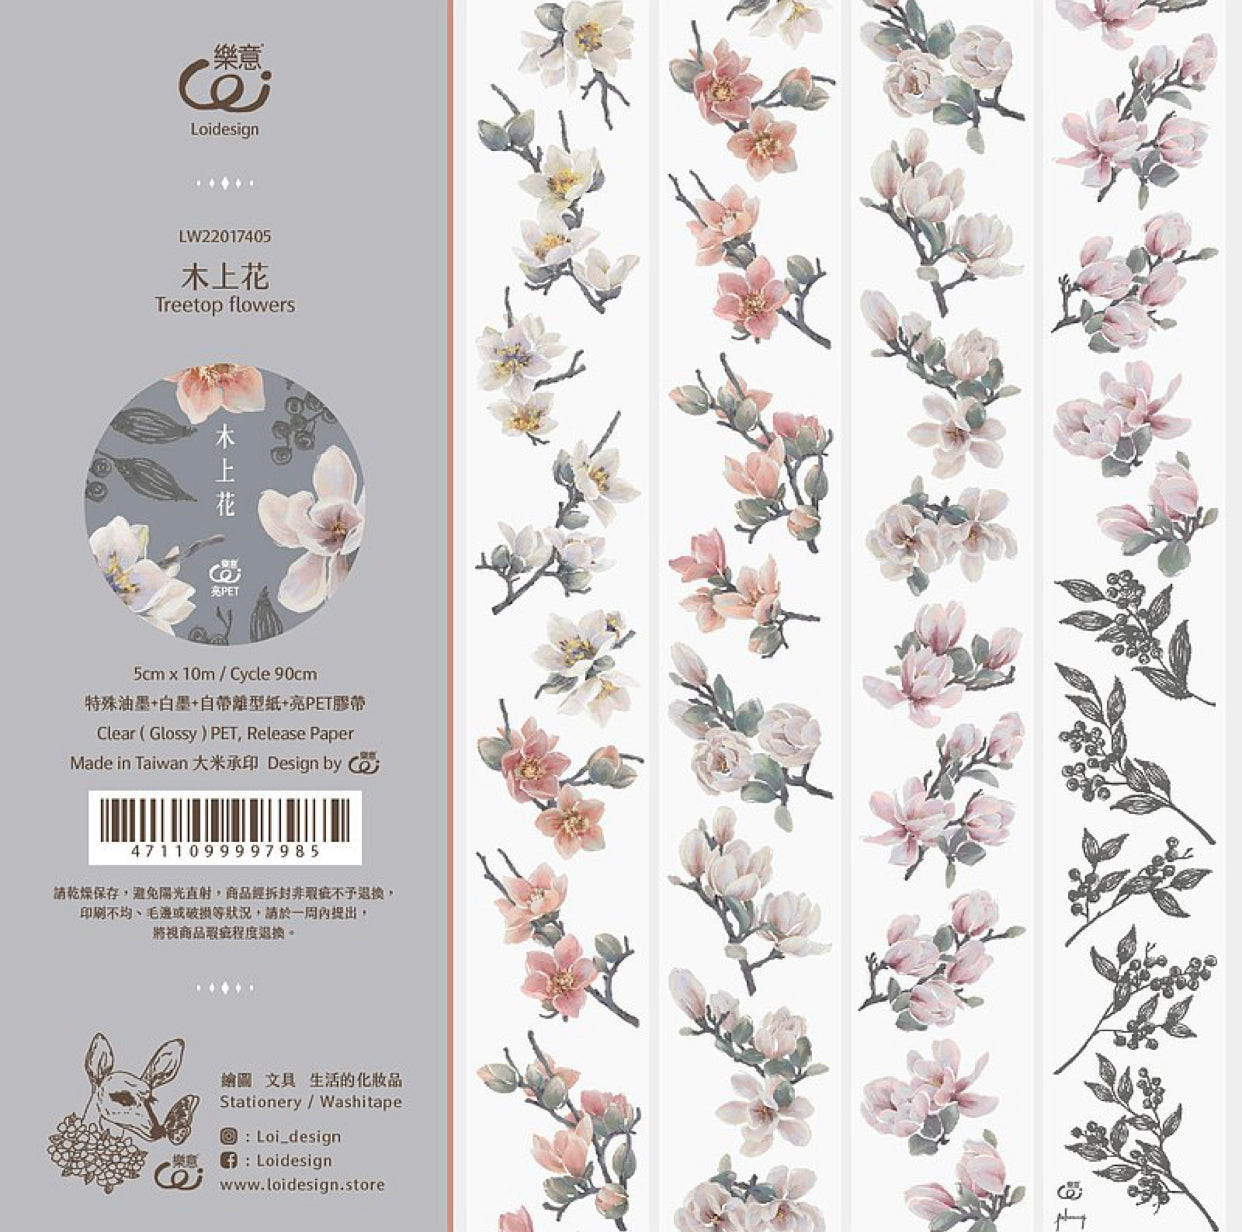 NEW Loidesign - Treetop Flowers | 5cm PET Tape | Release Paper